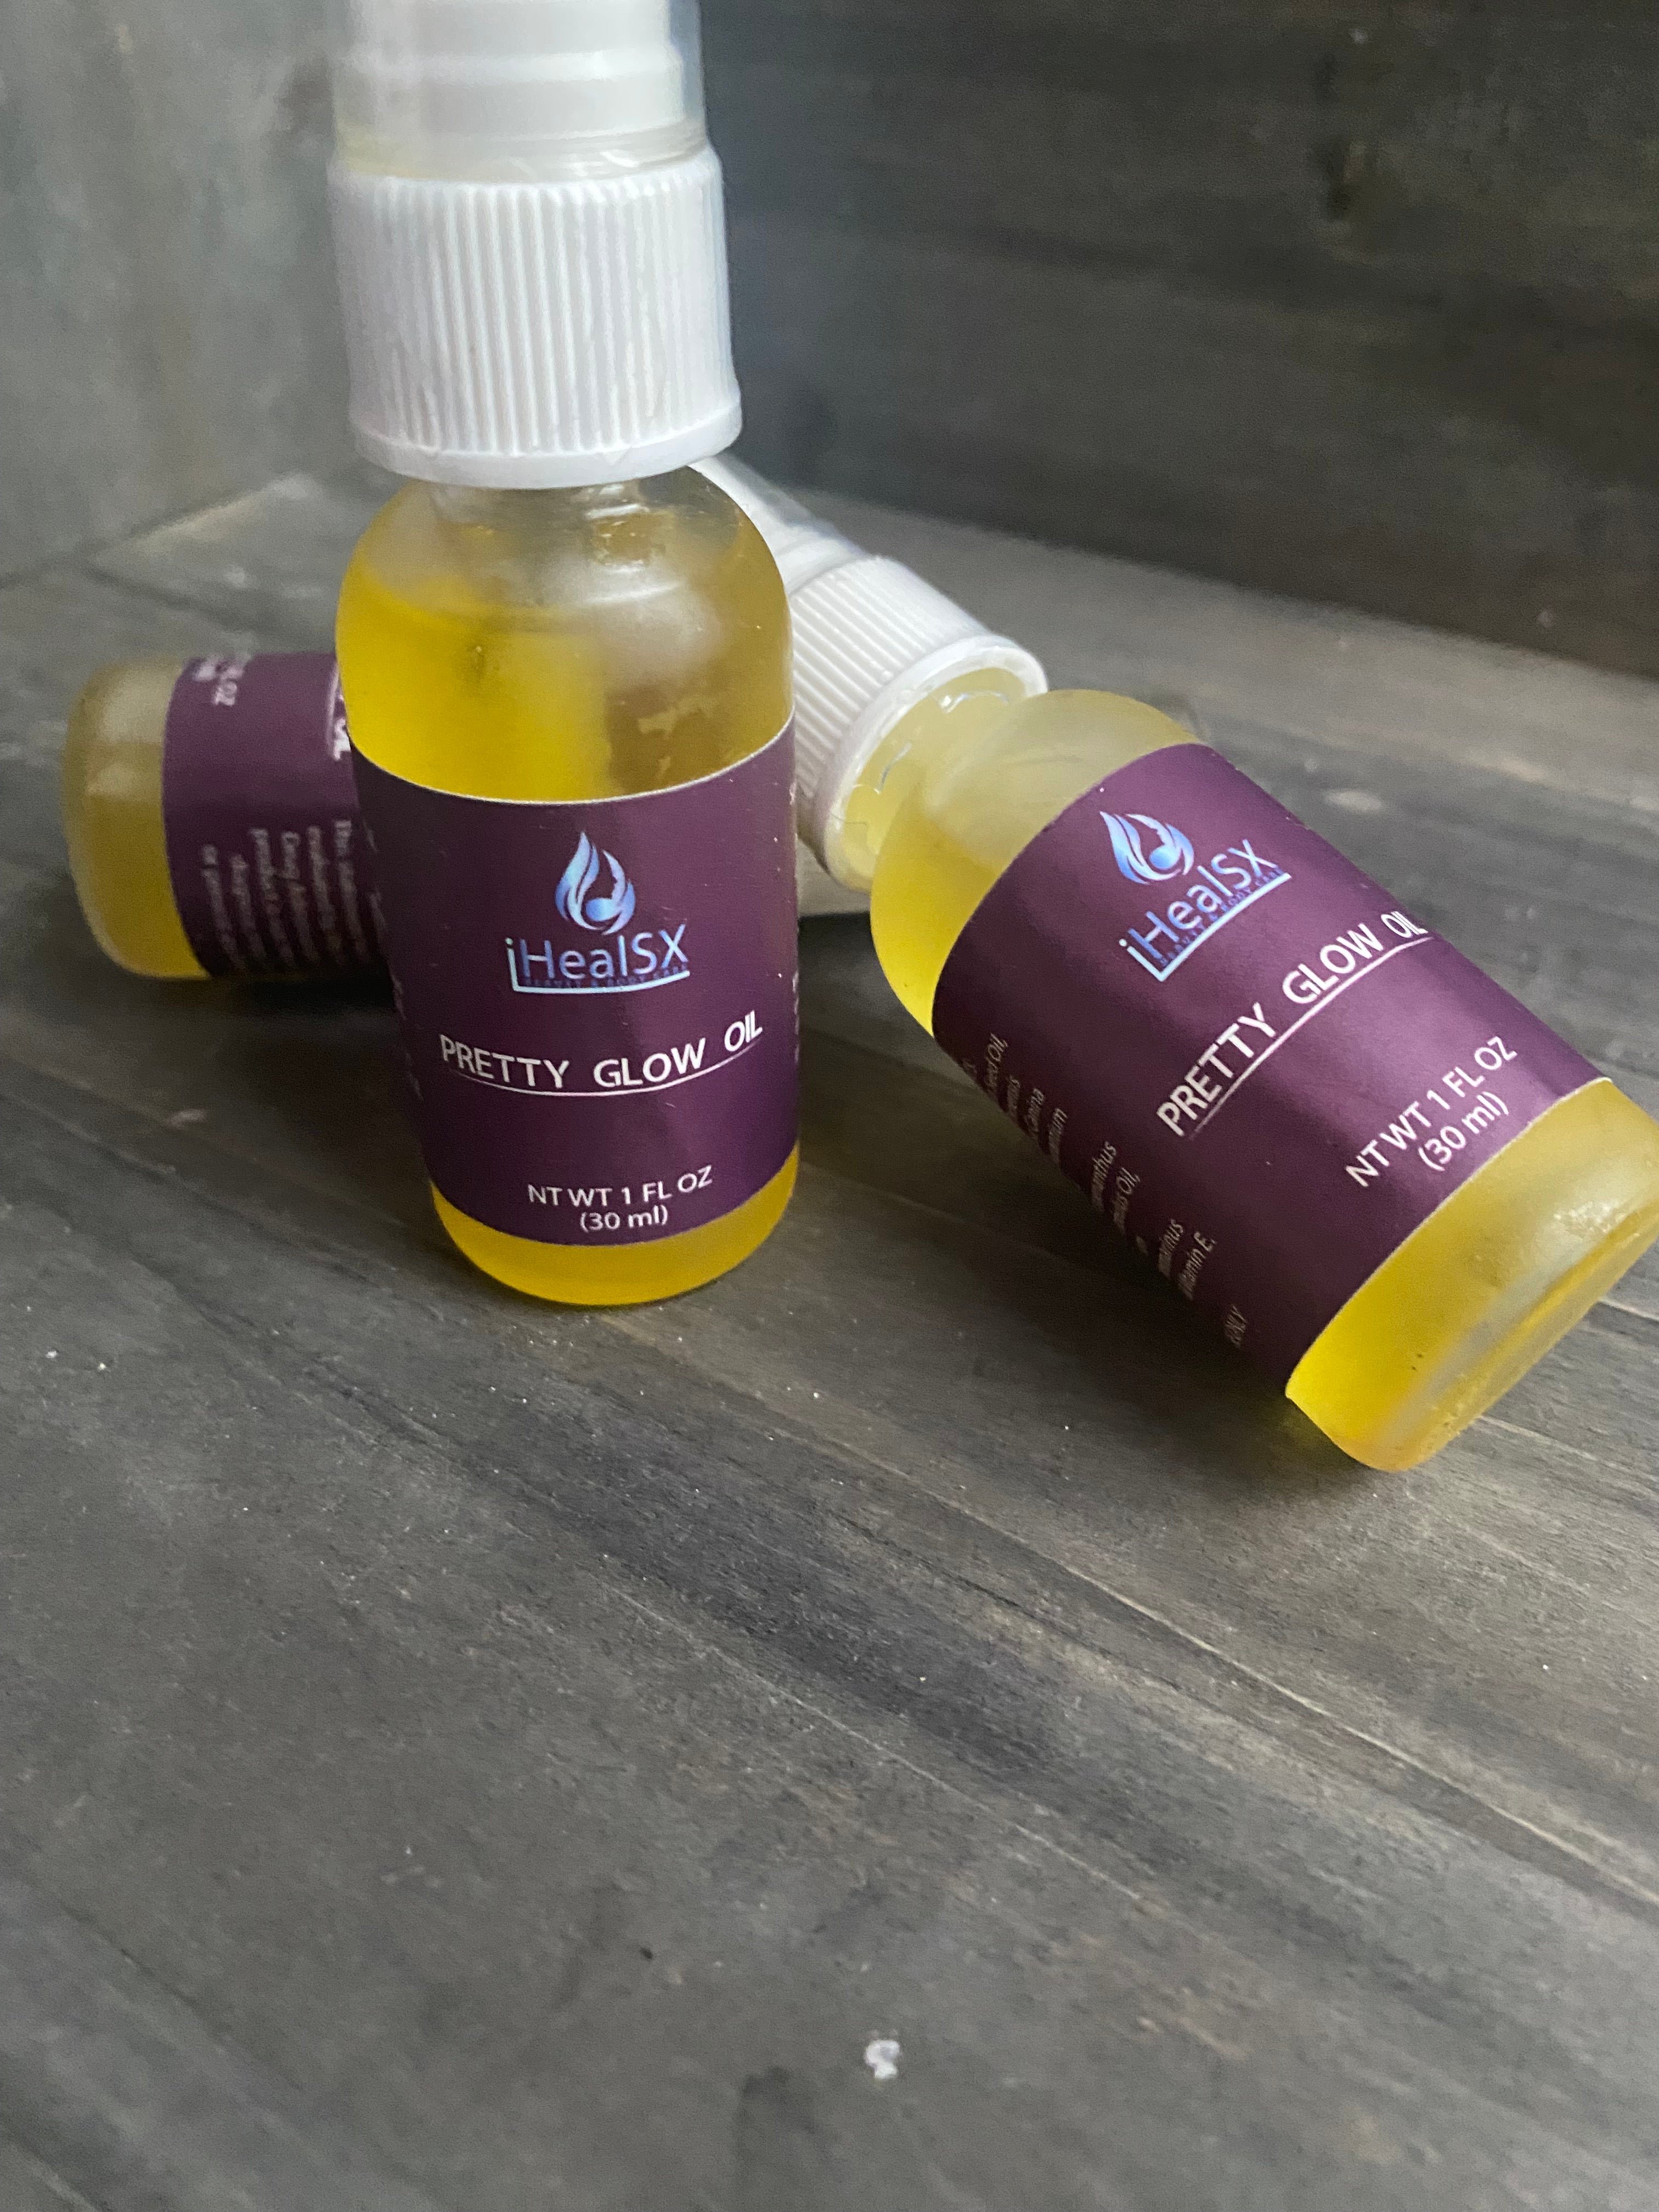 iHeal SX | Pretty Glow Oil | All Natural Face & Body Oil | 1 fl oz | Baobab Seed, Jojoba Oil & Rosehip Oil | Nourishing & Hydrating | For Acne Breakouts, Skin Inflammation & Dry Skin